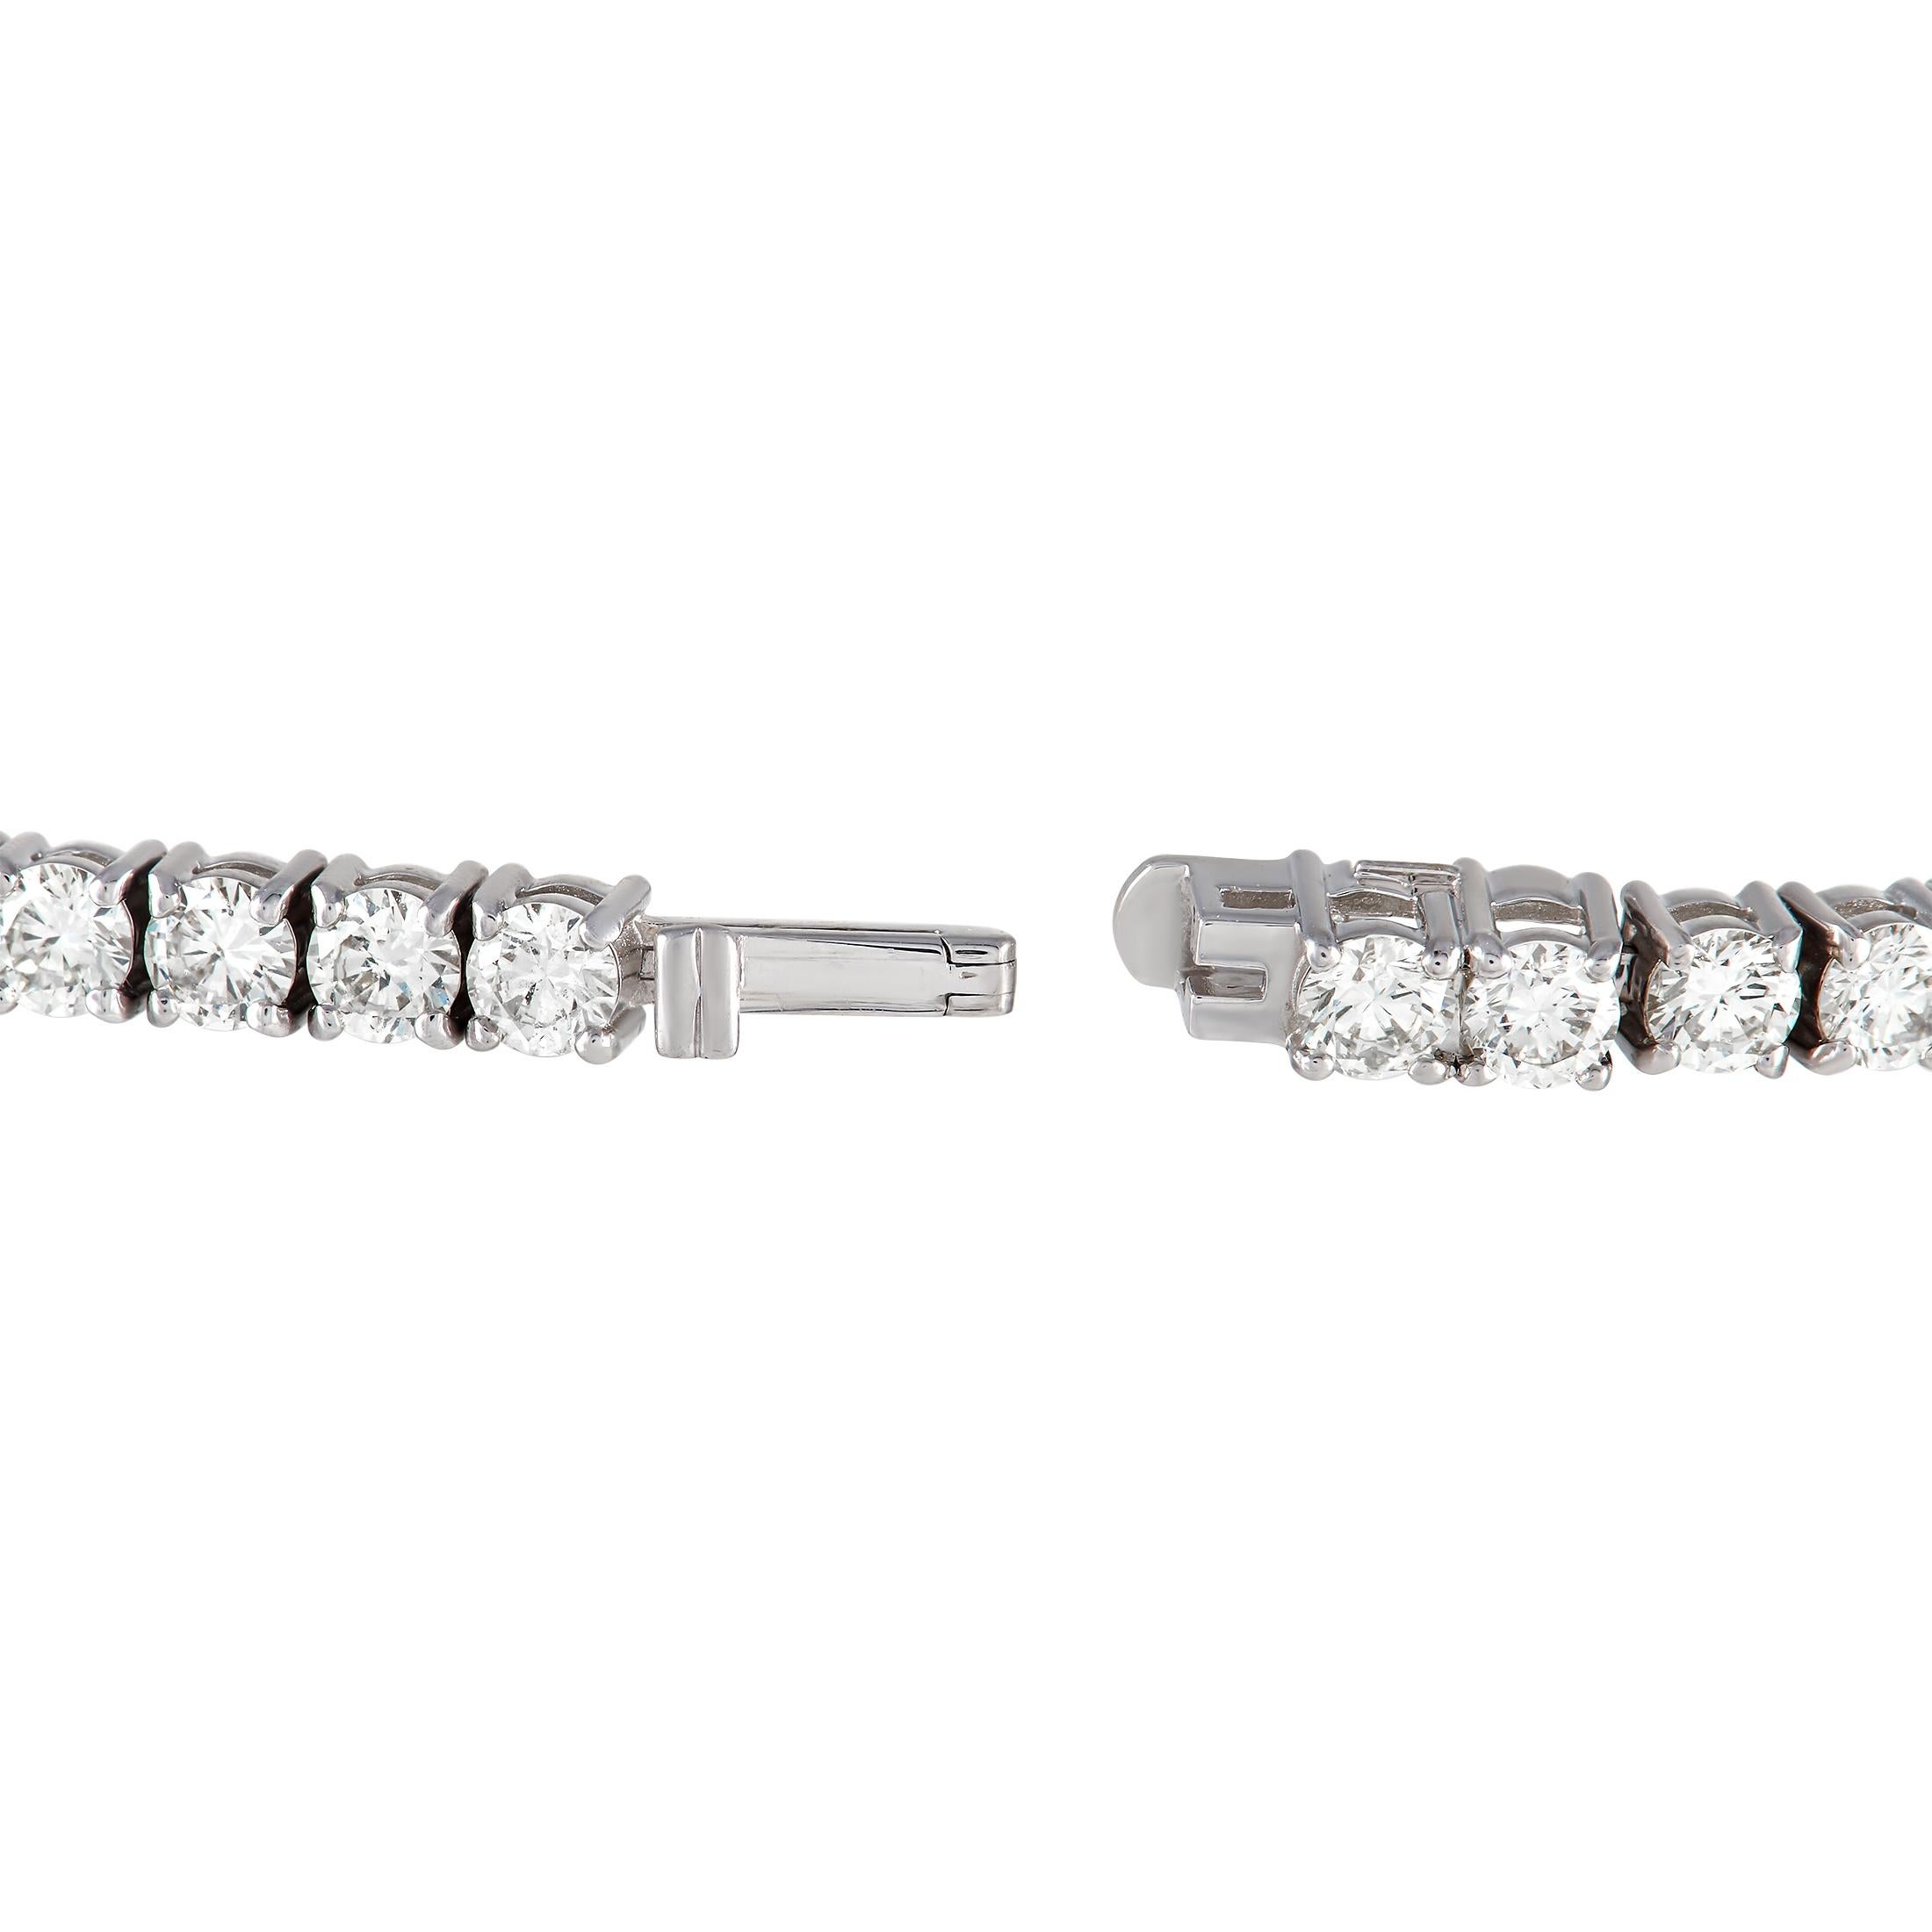 Versatile and made to last, this LB Exclusive tennis bracelet in 18K white gold is an endearing piece of jewelry you'll hold on to forever.  It glistens with 7.93 carats of diamonds and is always ready to bring a touch of glam to any outfit. The